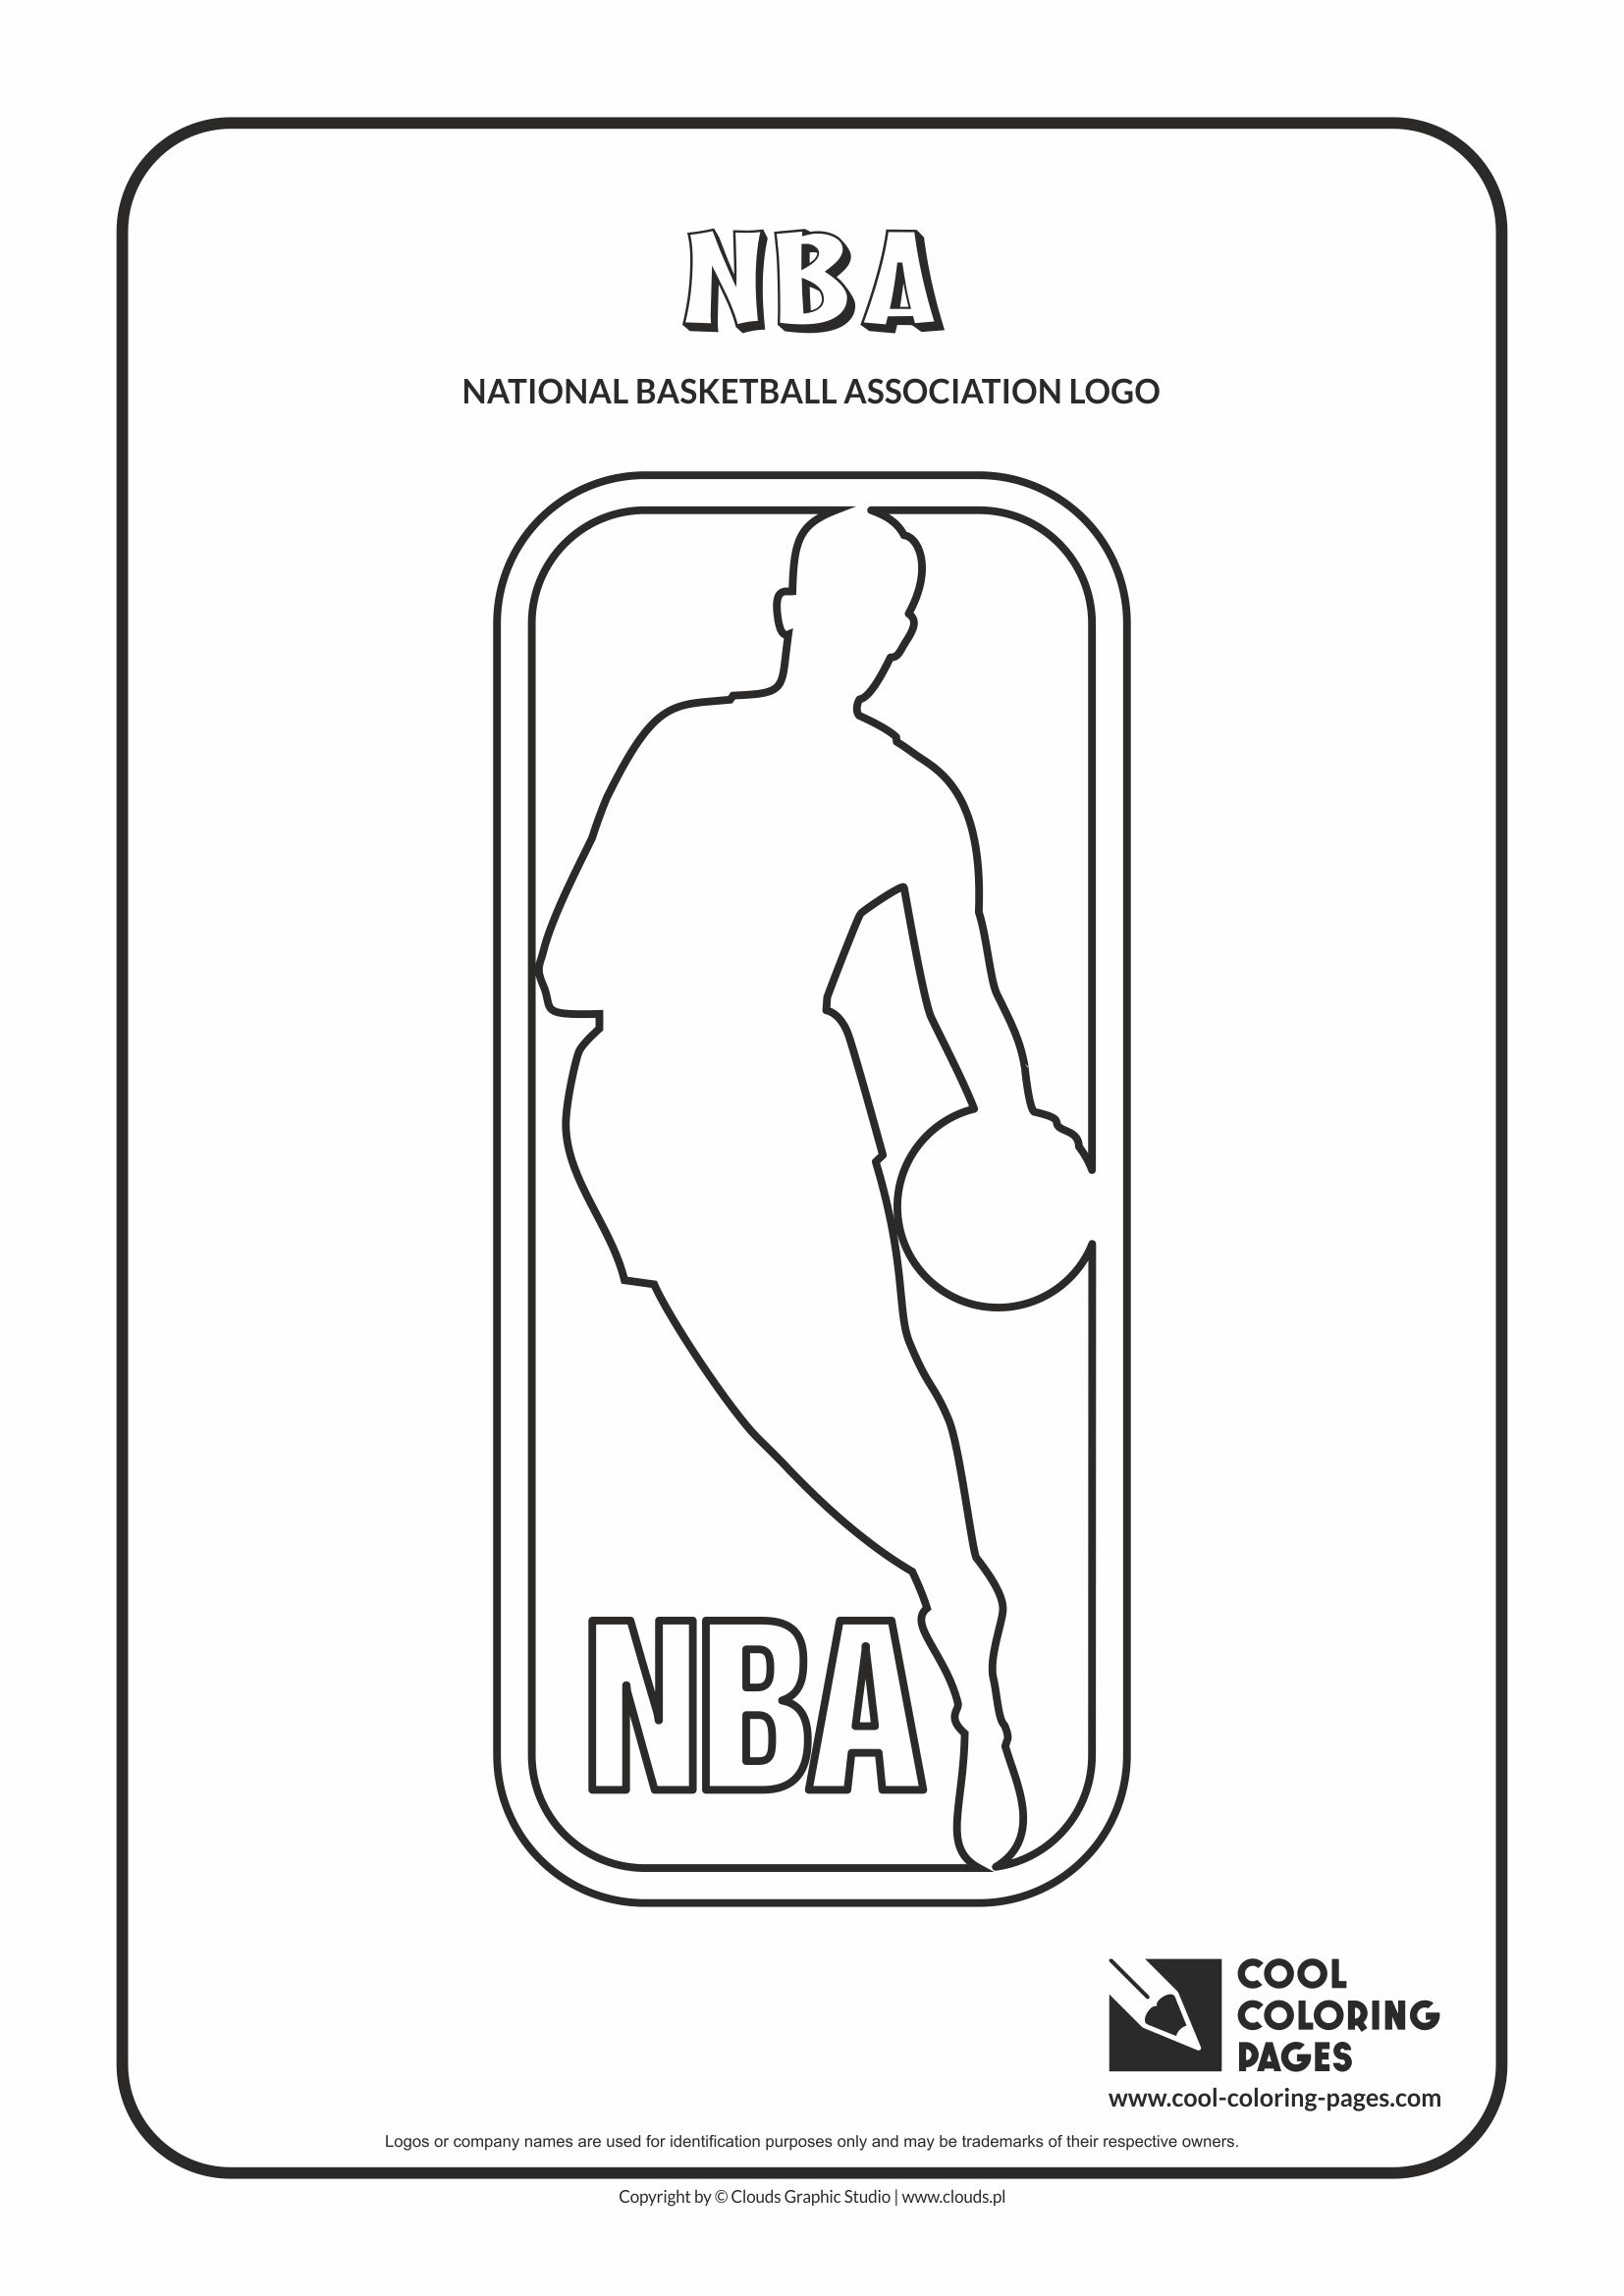 Cool Coloring Pages - NBA Logo coloring pages / National Basketball Association coloring page